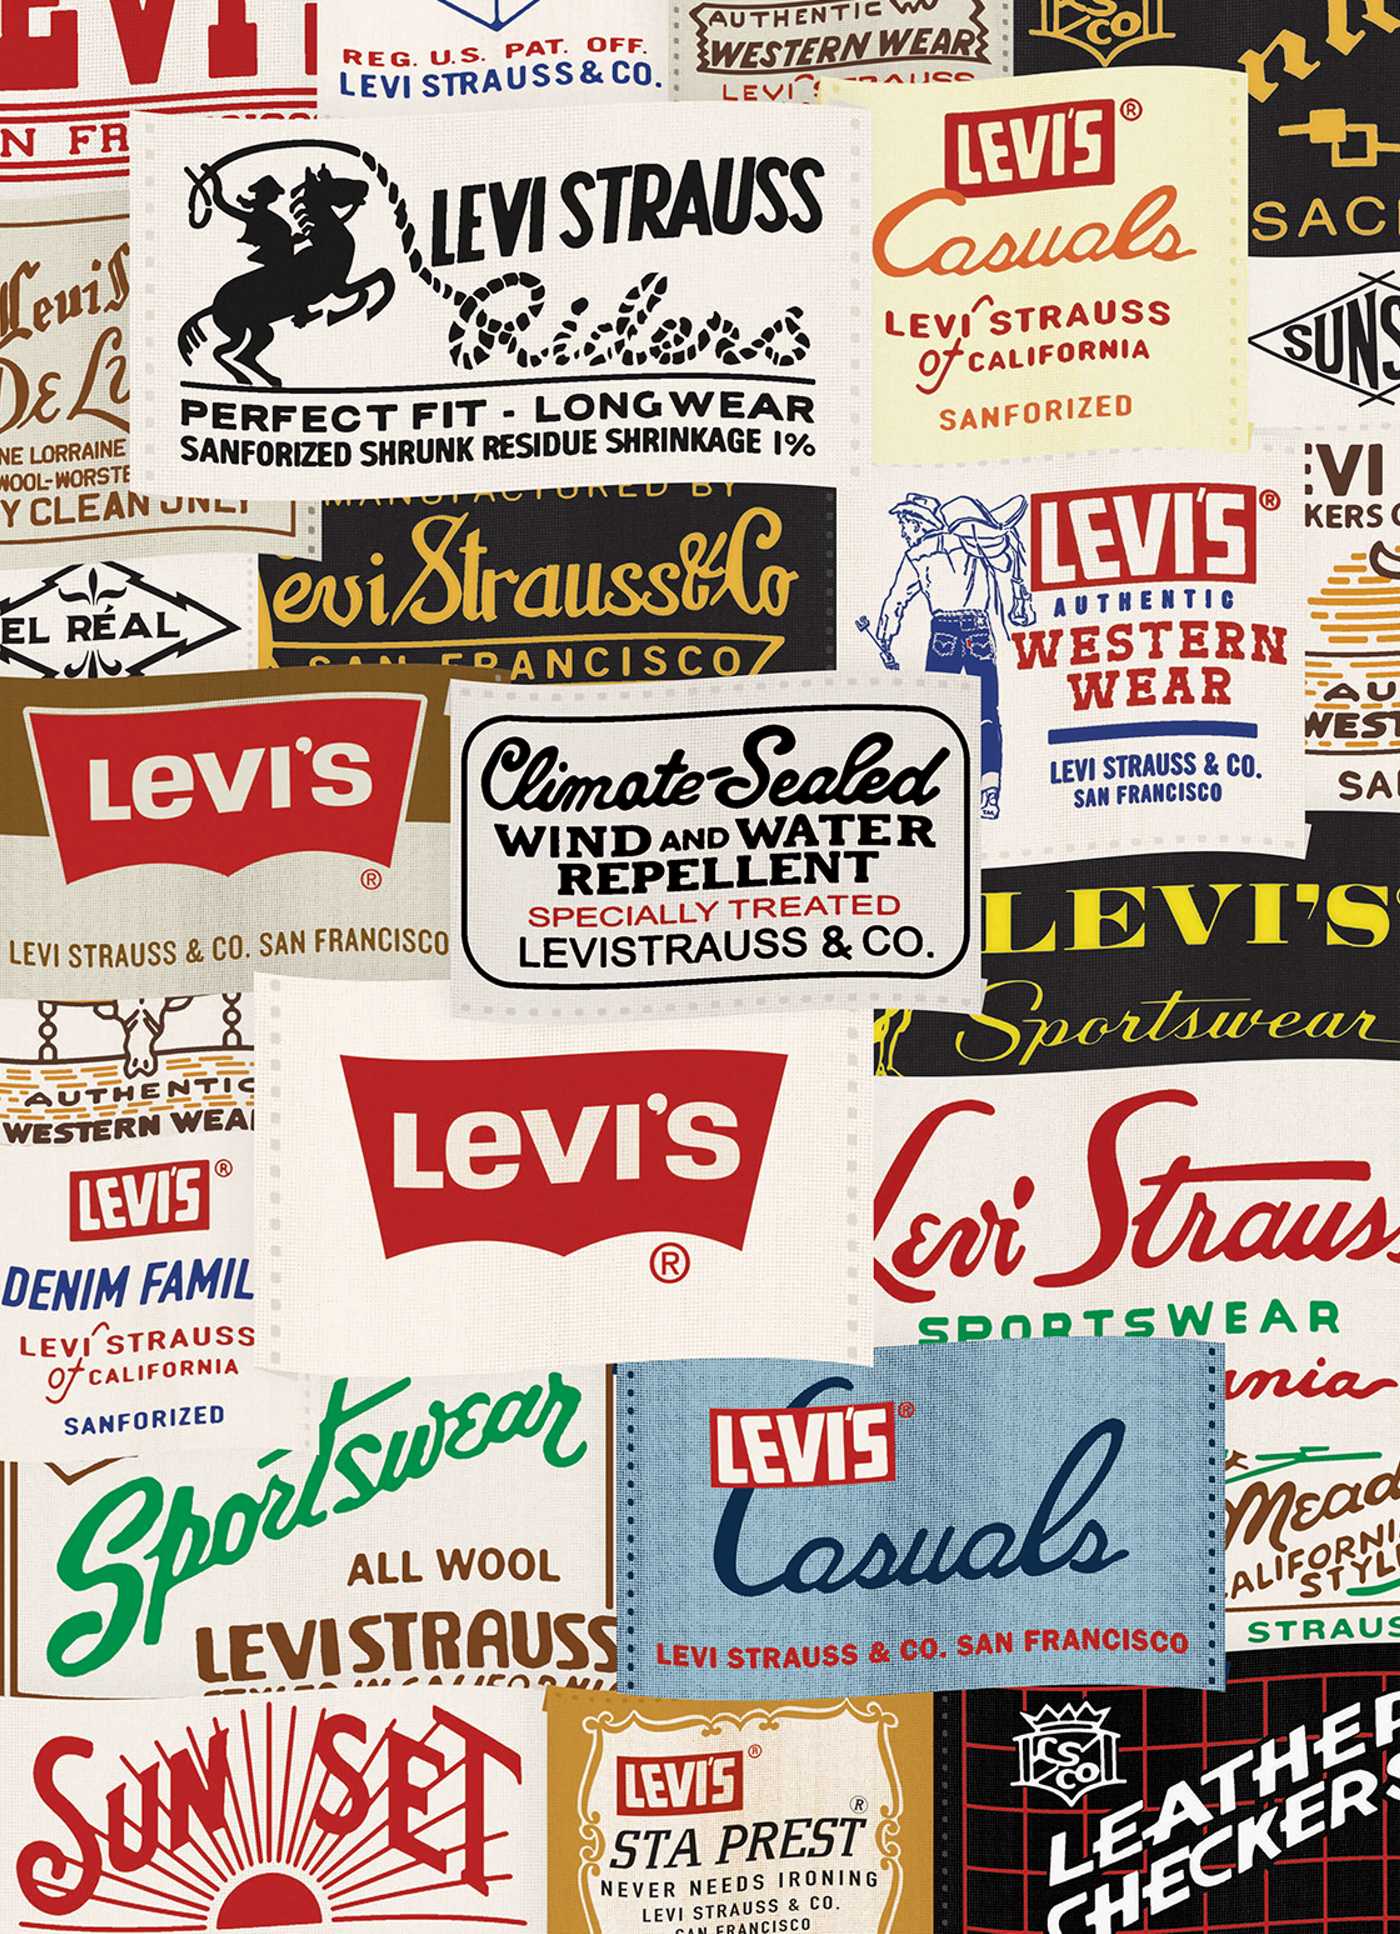 Levi’s Vintage Clothing Now Available From Mr Porter - MOJEH MEN